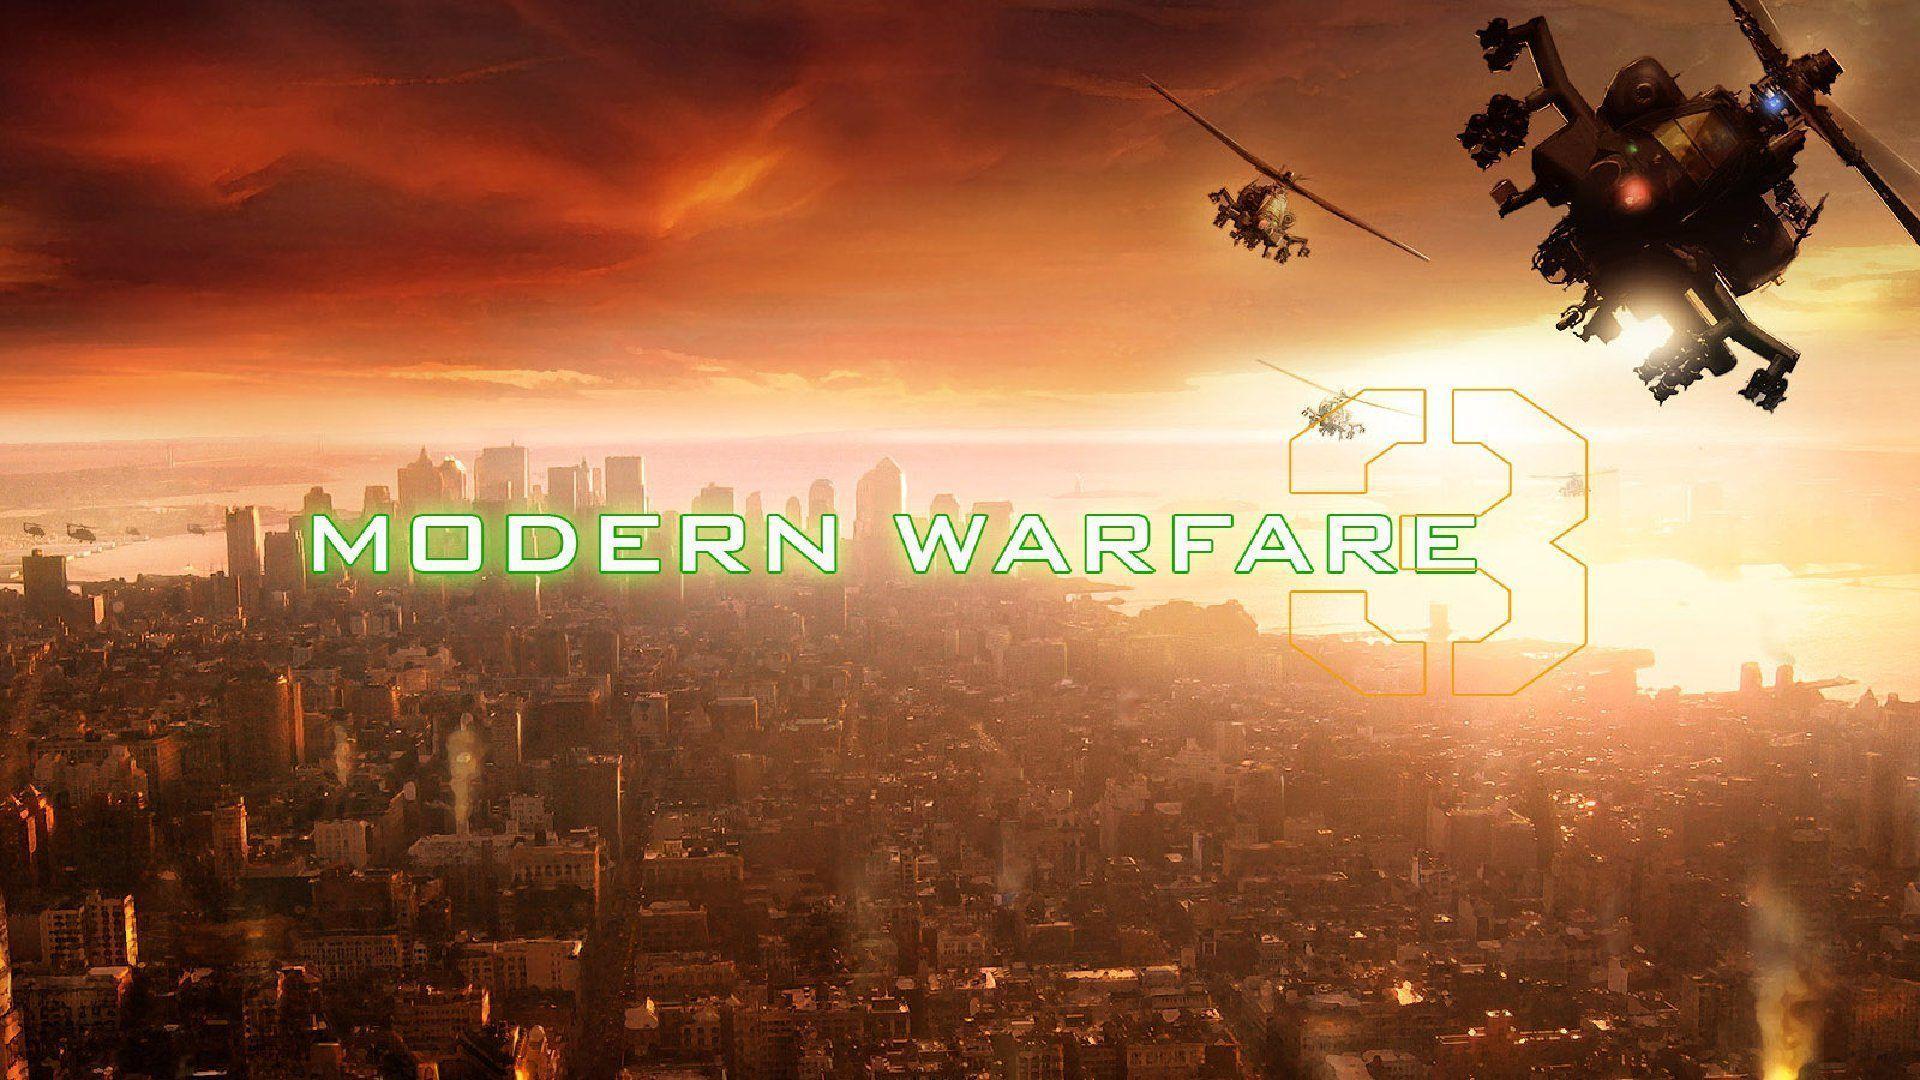 Call Of Duty Mw3 Hd Wallpapers Game Wallpapers 5 Pictures to pin on